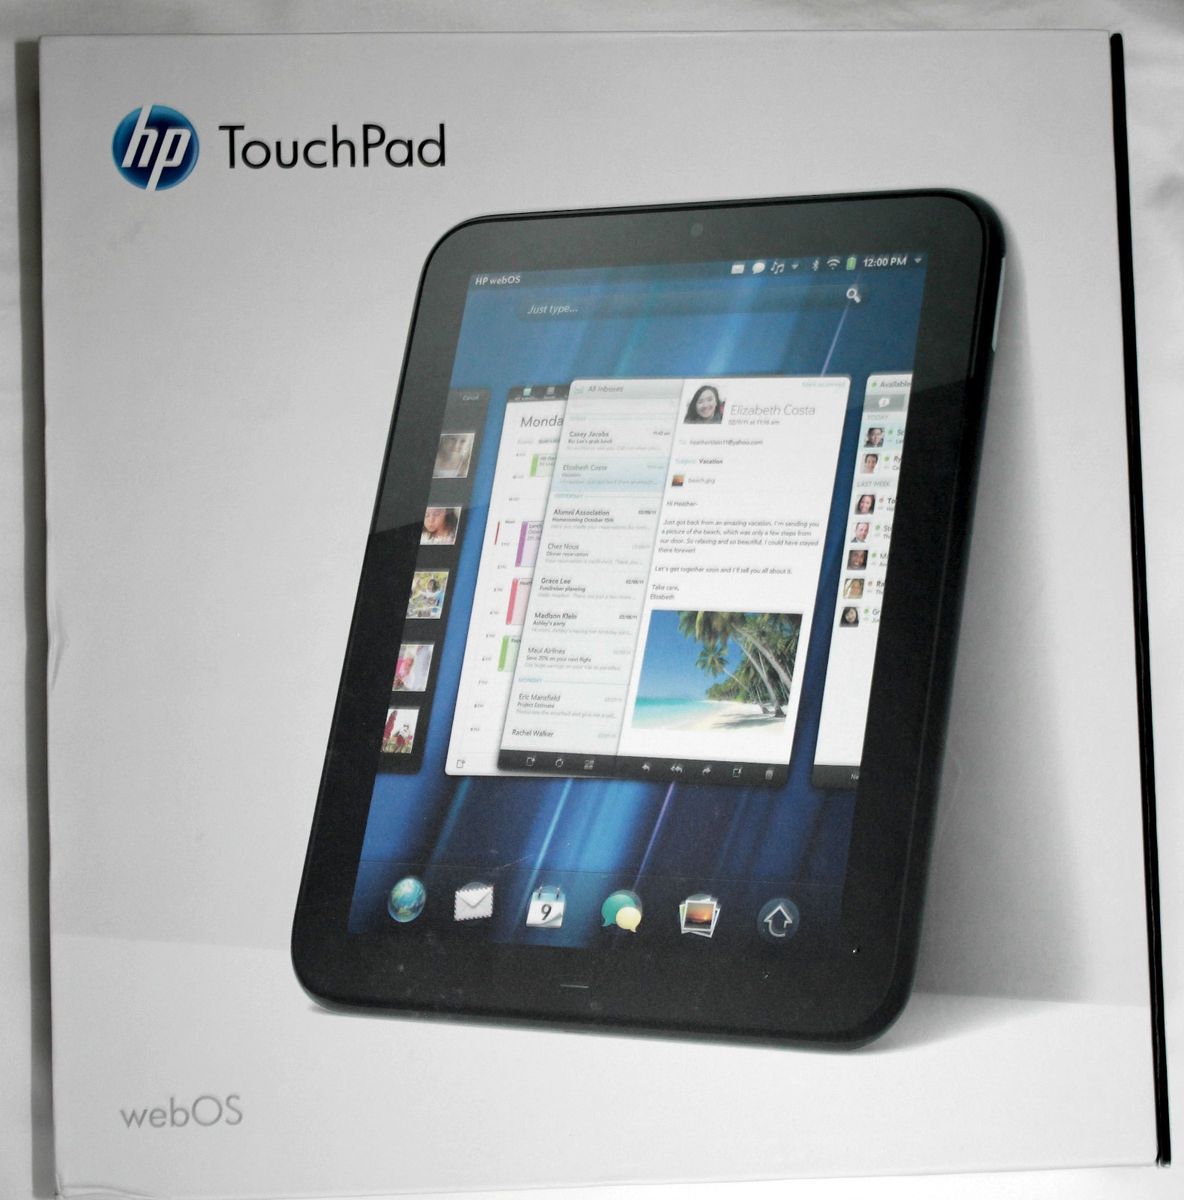 HP TouchPad 16GB, Wi Fi, 9.7in with WebOS & Android OS